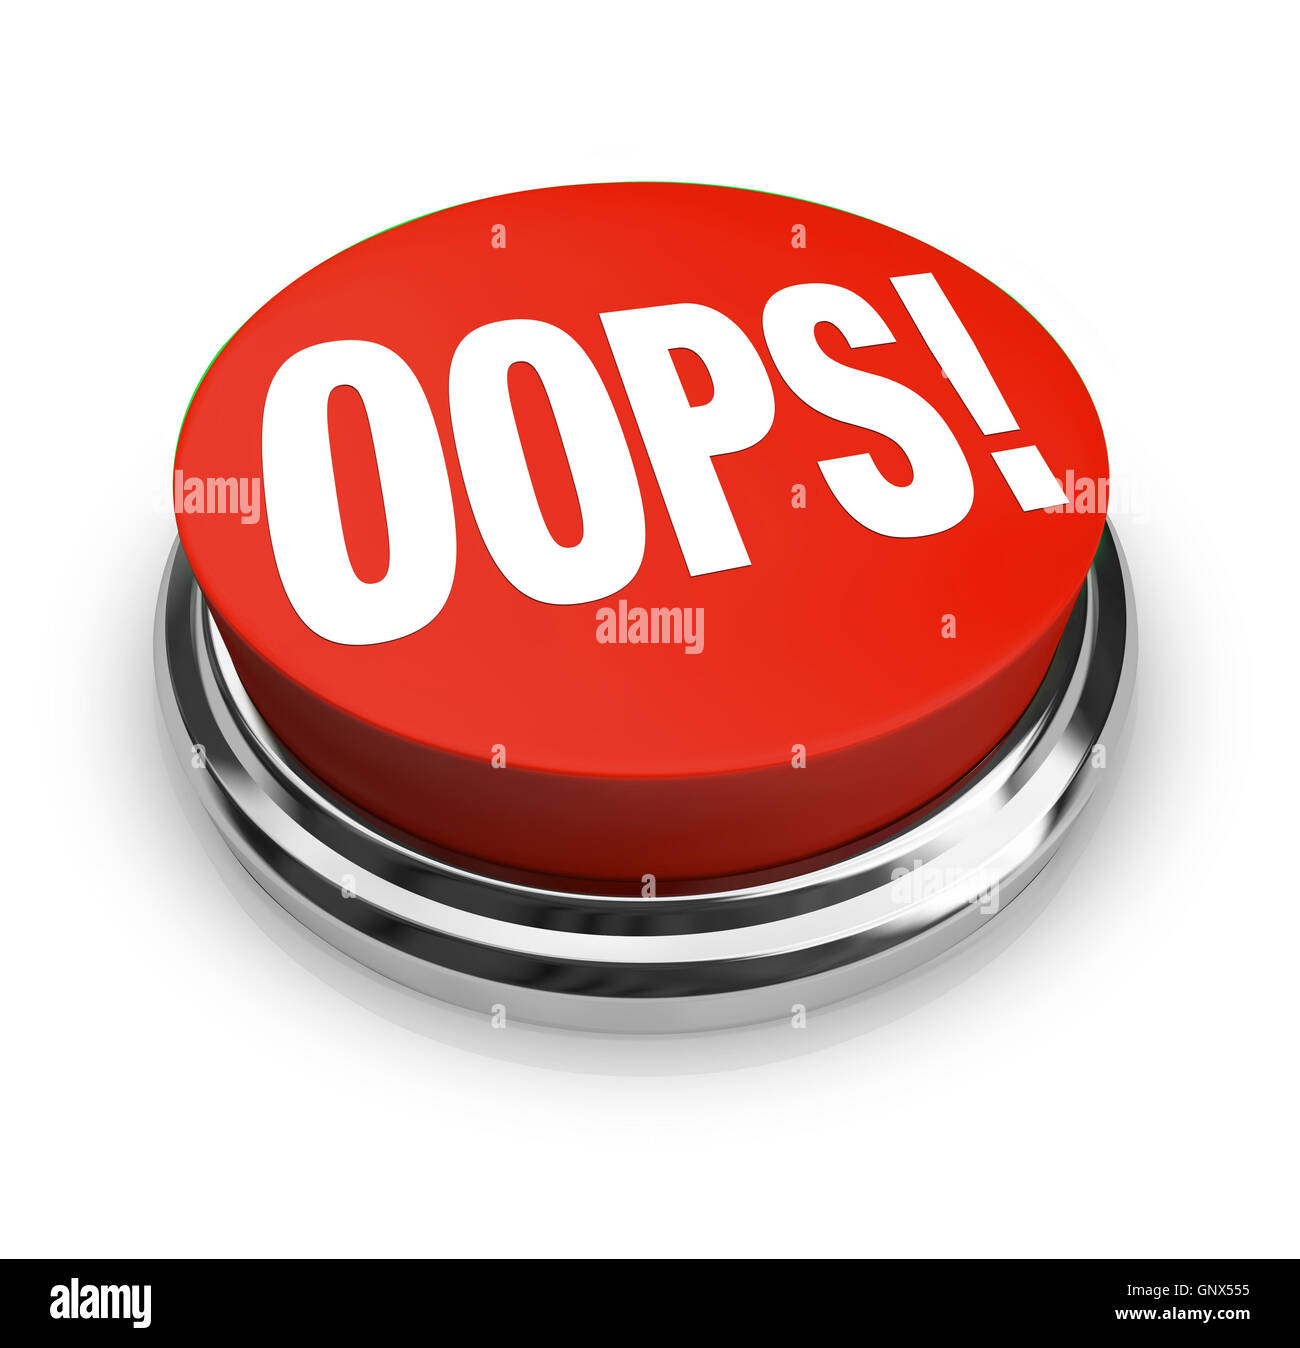 Oops Word on Big Red Button Correct Mistake Stock Photo